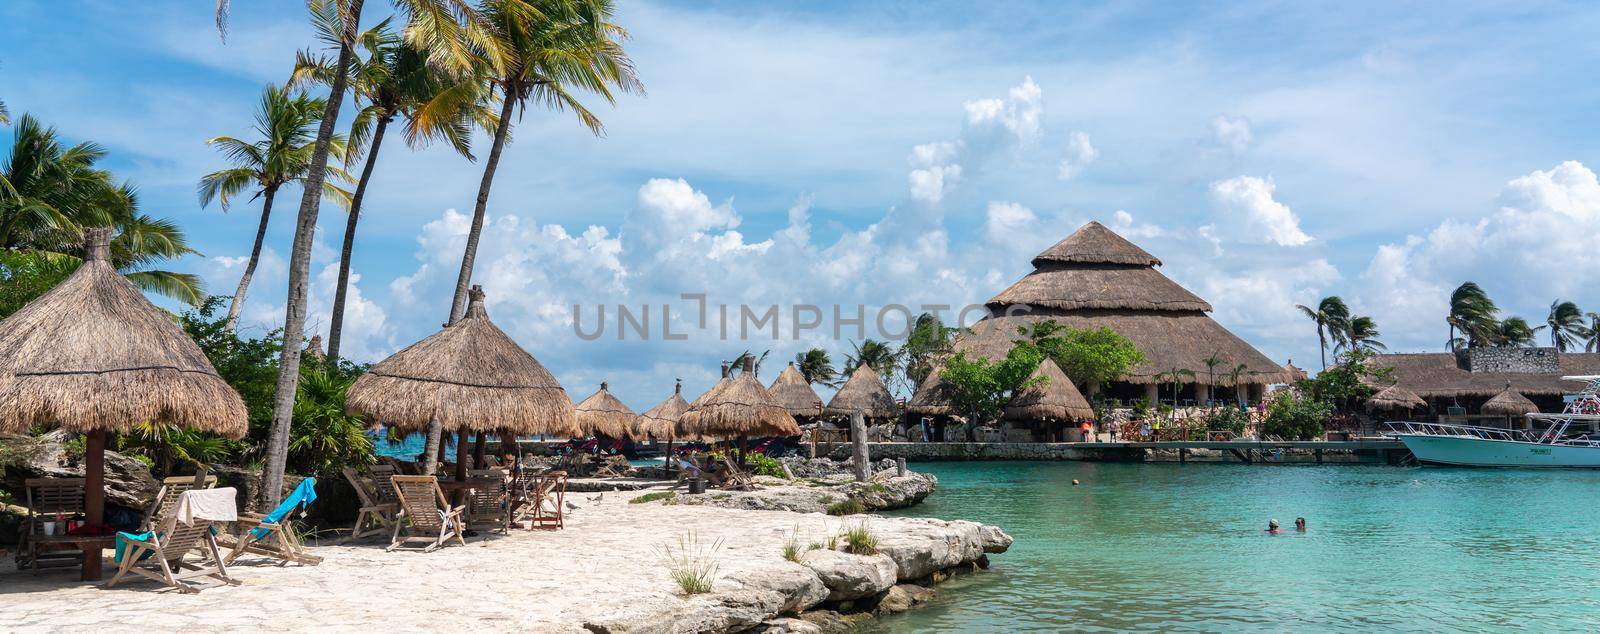 Cancun, Mexico - September 13, 2021: Lagoon at XCaret park on the Mayan Riviera resort. XCaret is a famous ecotourism park on the mexican Mayan Riviera by Mariakray